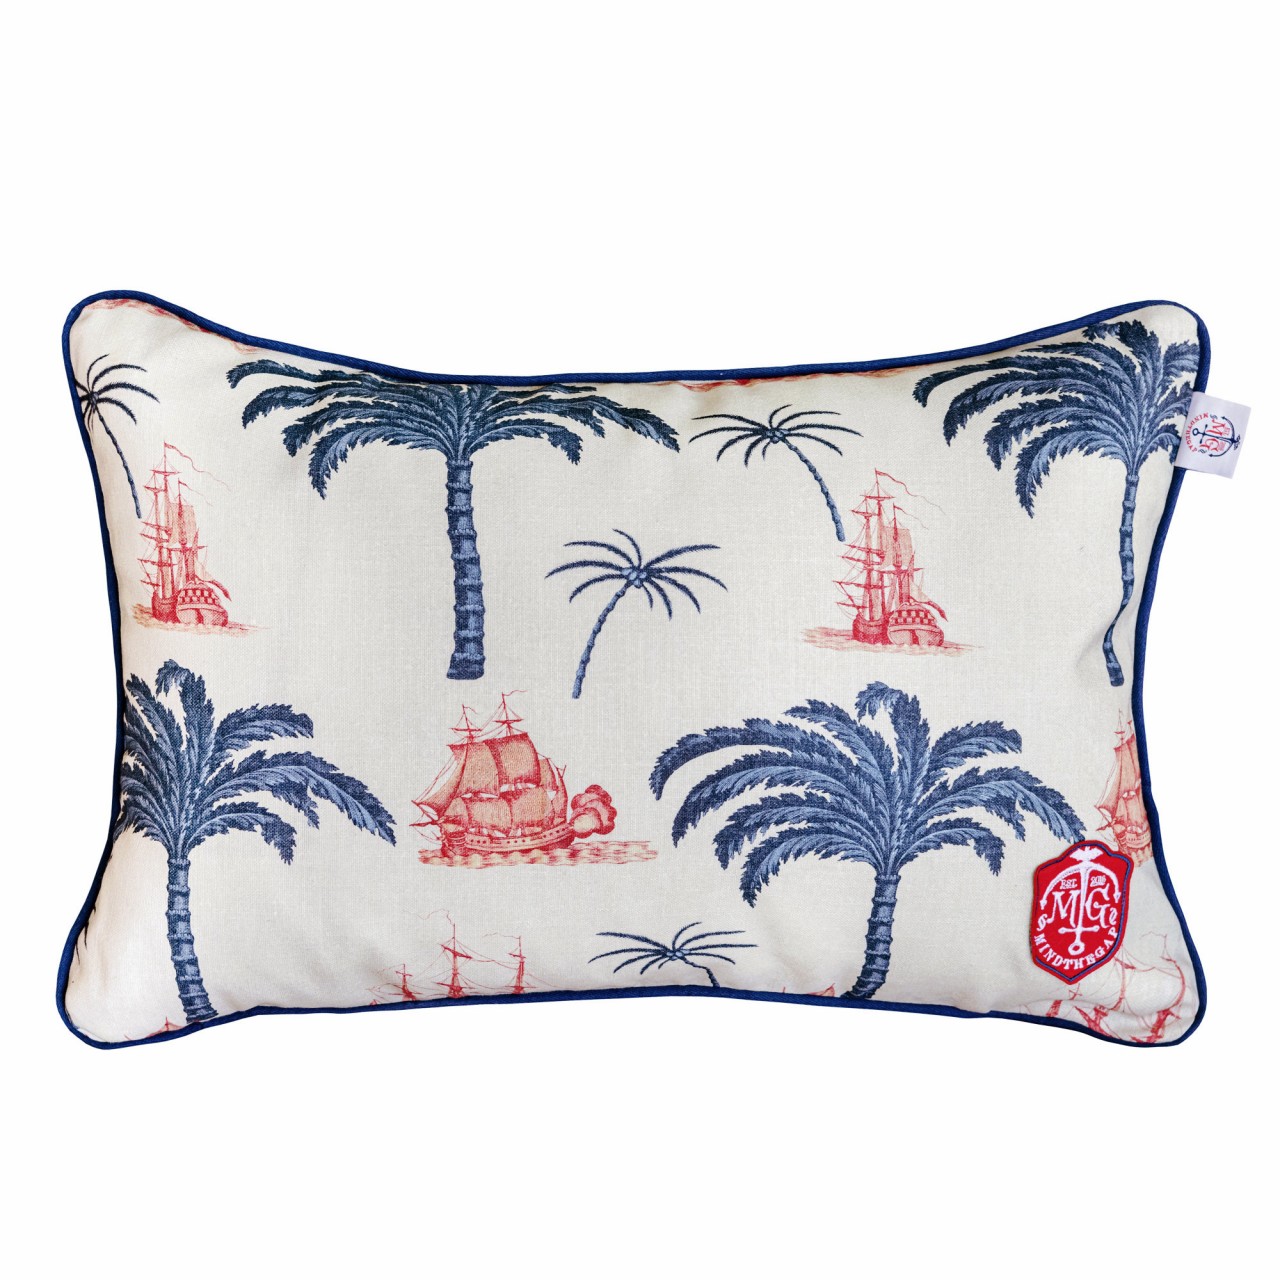 images/productimages/small/aegean-outdoor-cushion-60x40cm-lc40124-2.jpg